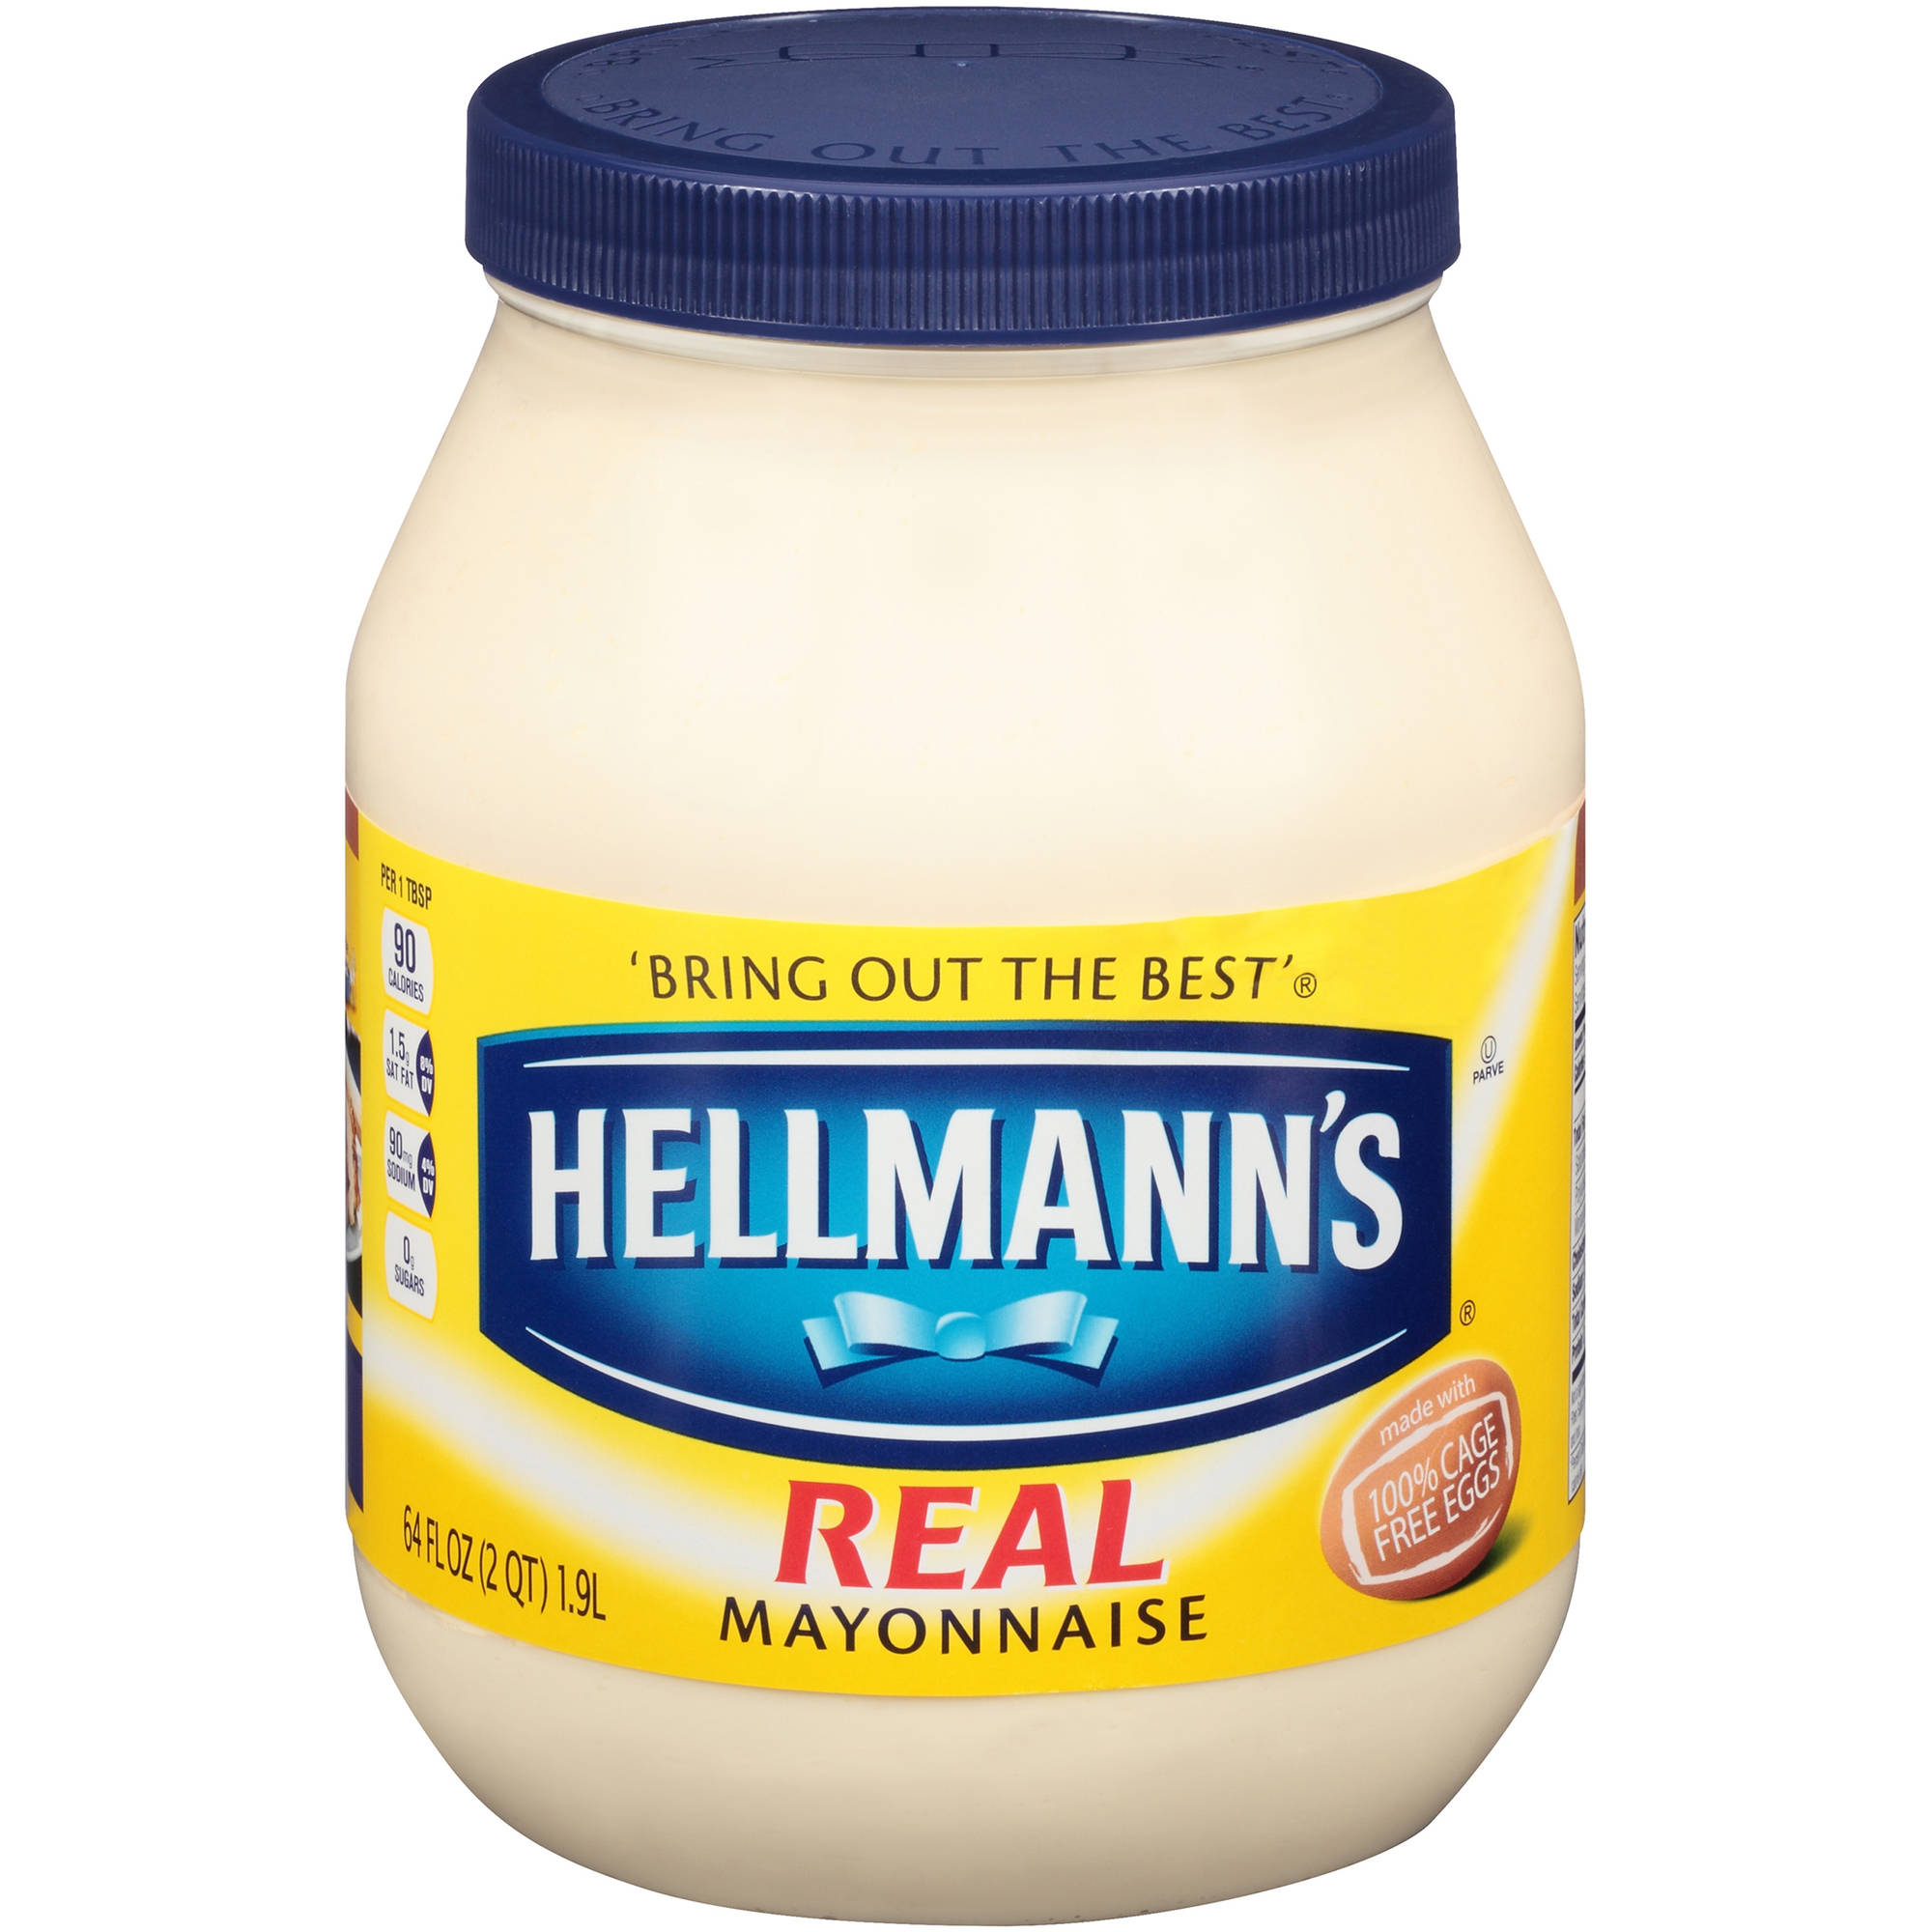 Hellmann's Mayonnaise for Delicious Sandwiches Real Mayo Rich in Omega 3-ALA 64 oz